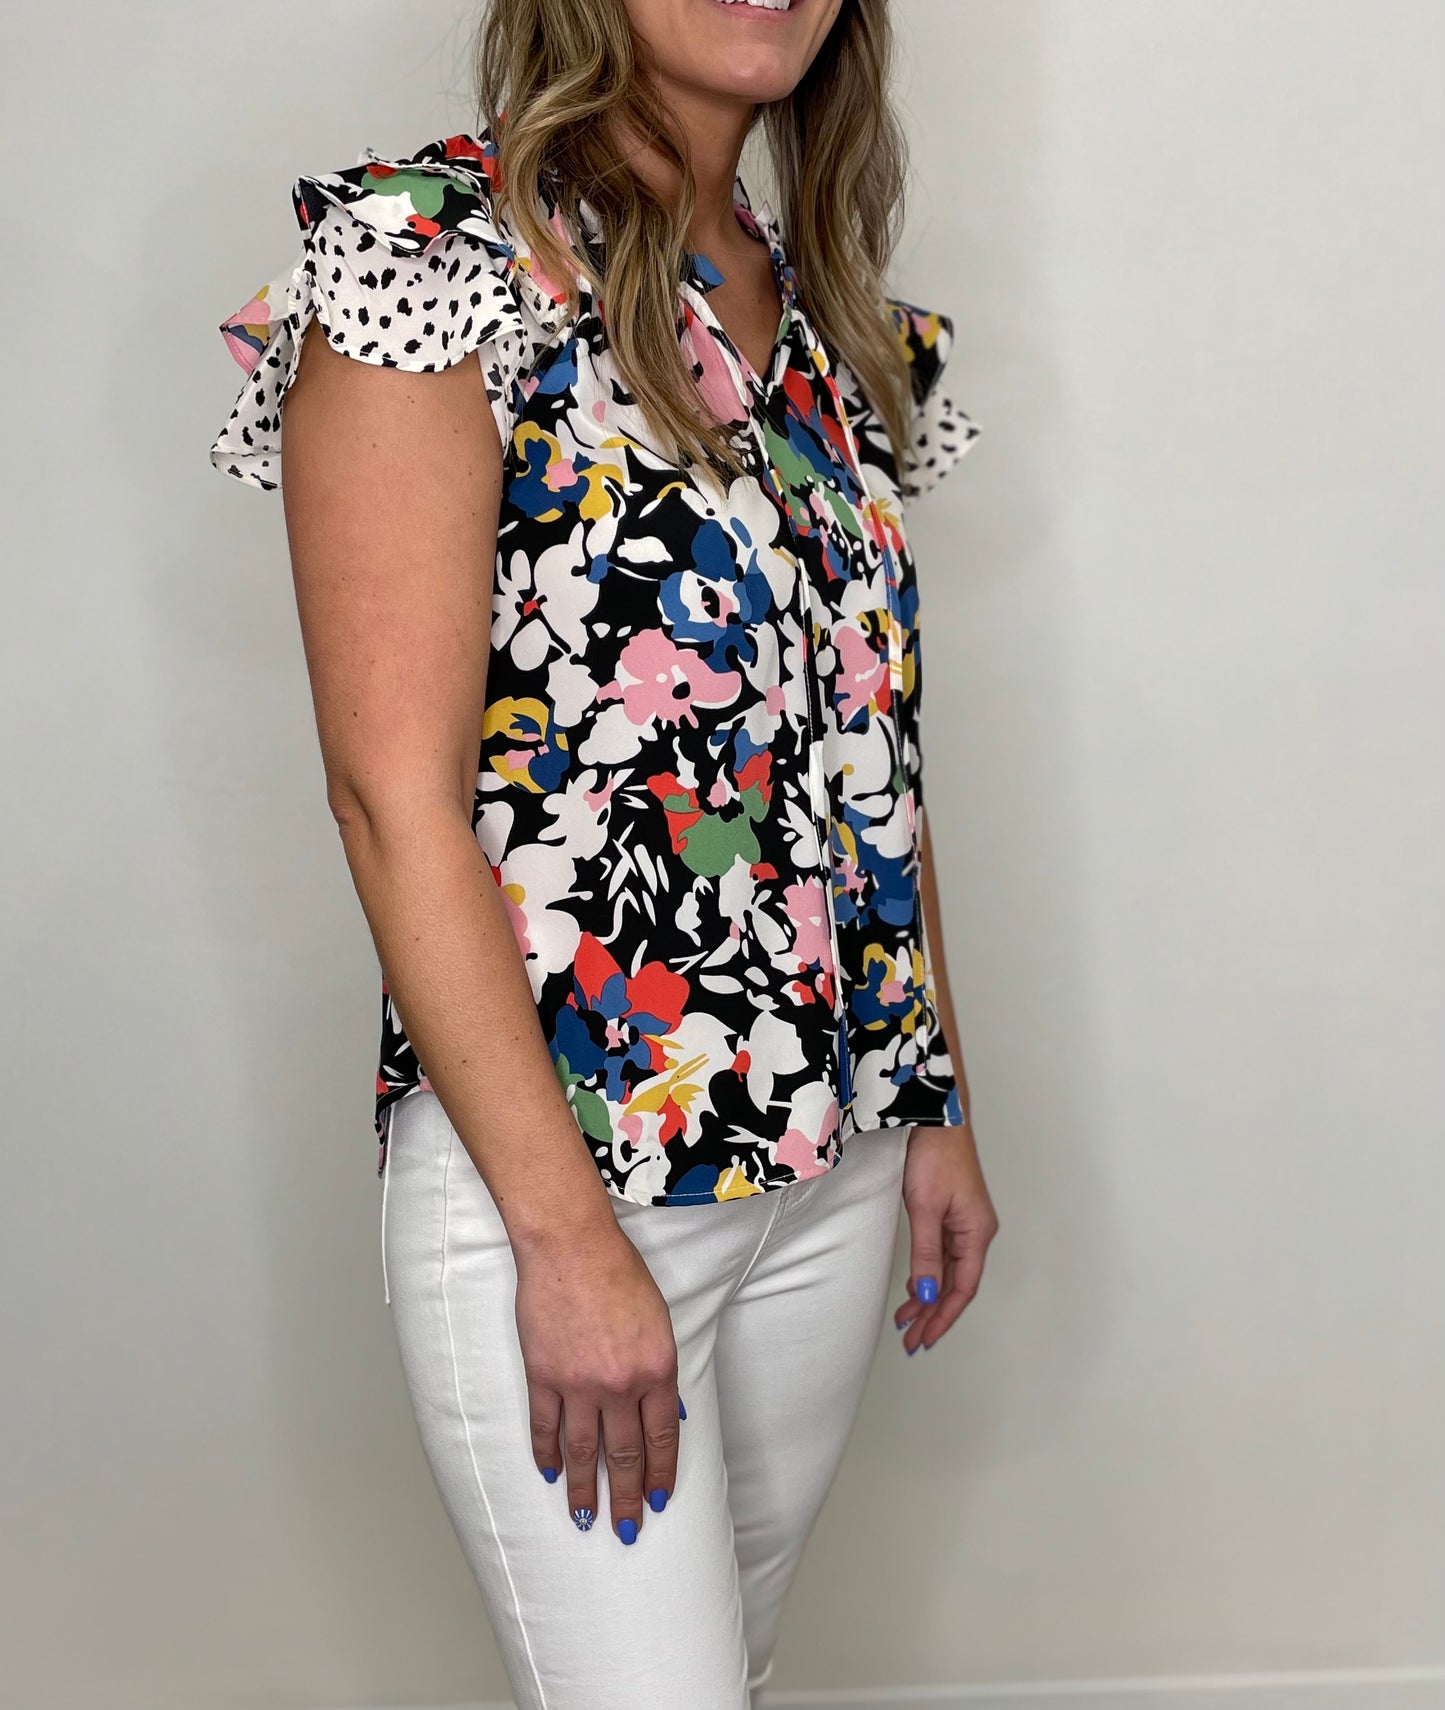 The Sudlow Mixed Floral Top